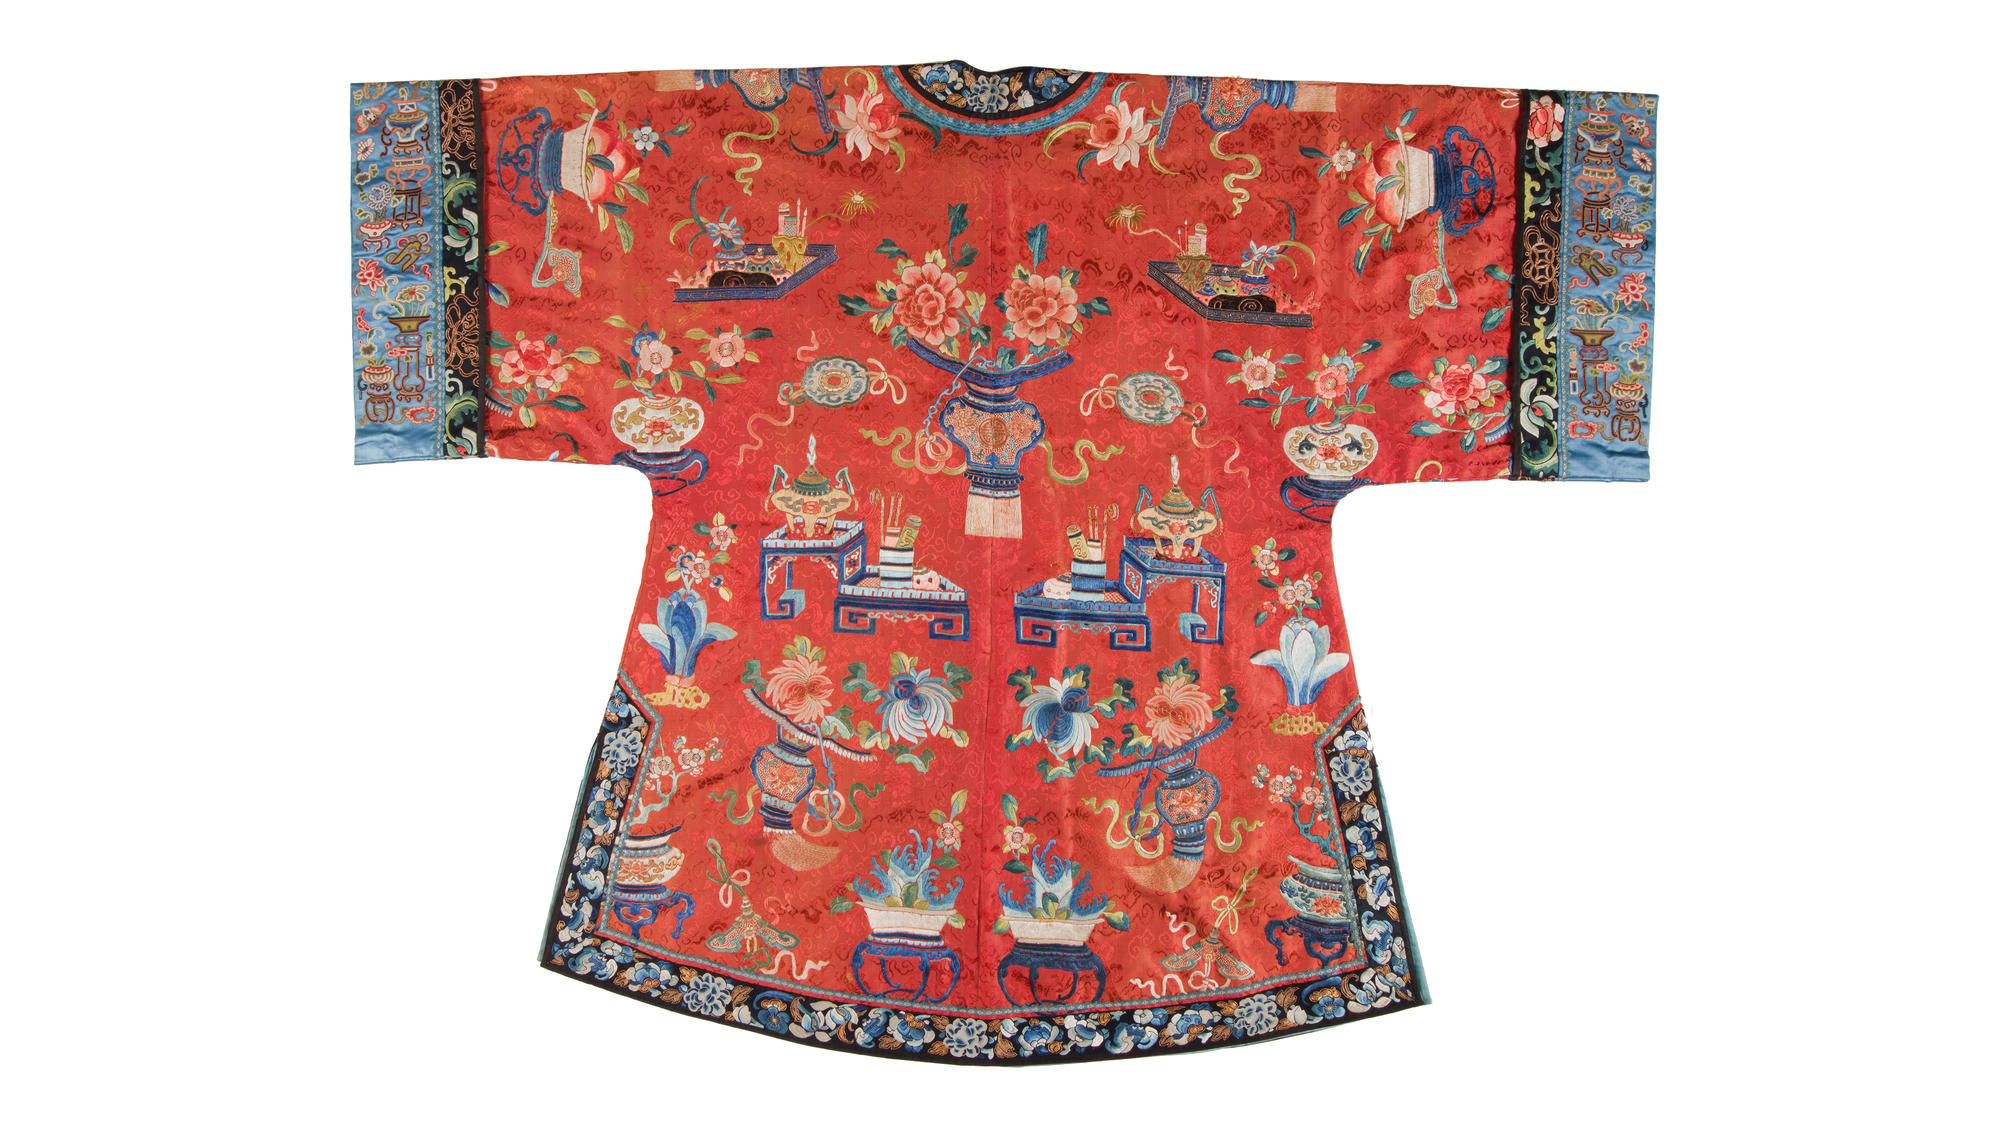 Coat, China, mid-19th century. 40 x 54 in. The Textile Museum 1985.33.267. Gift of The Florence Eddowes Morris Collection, Goucher College.